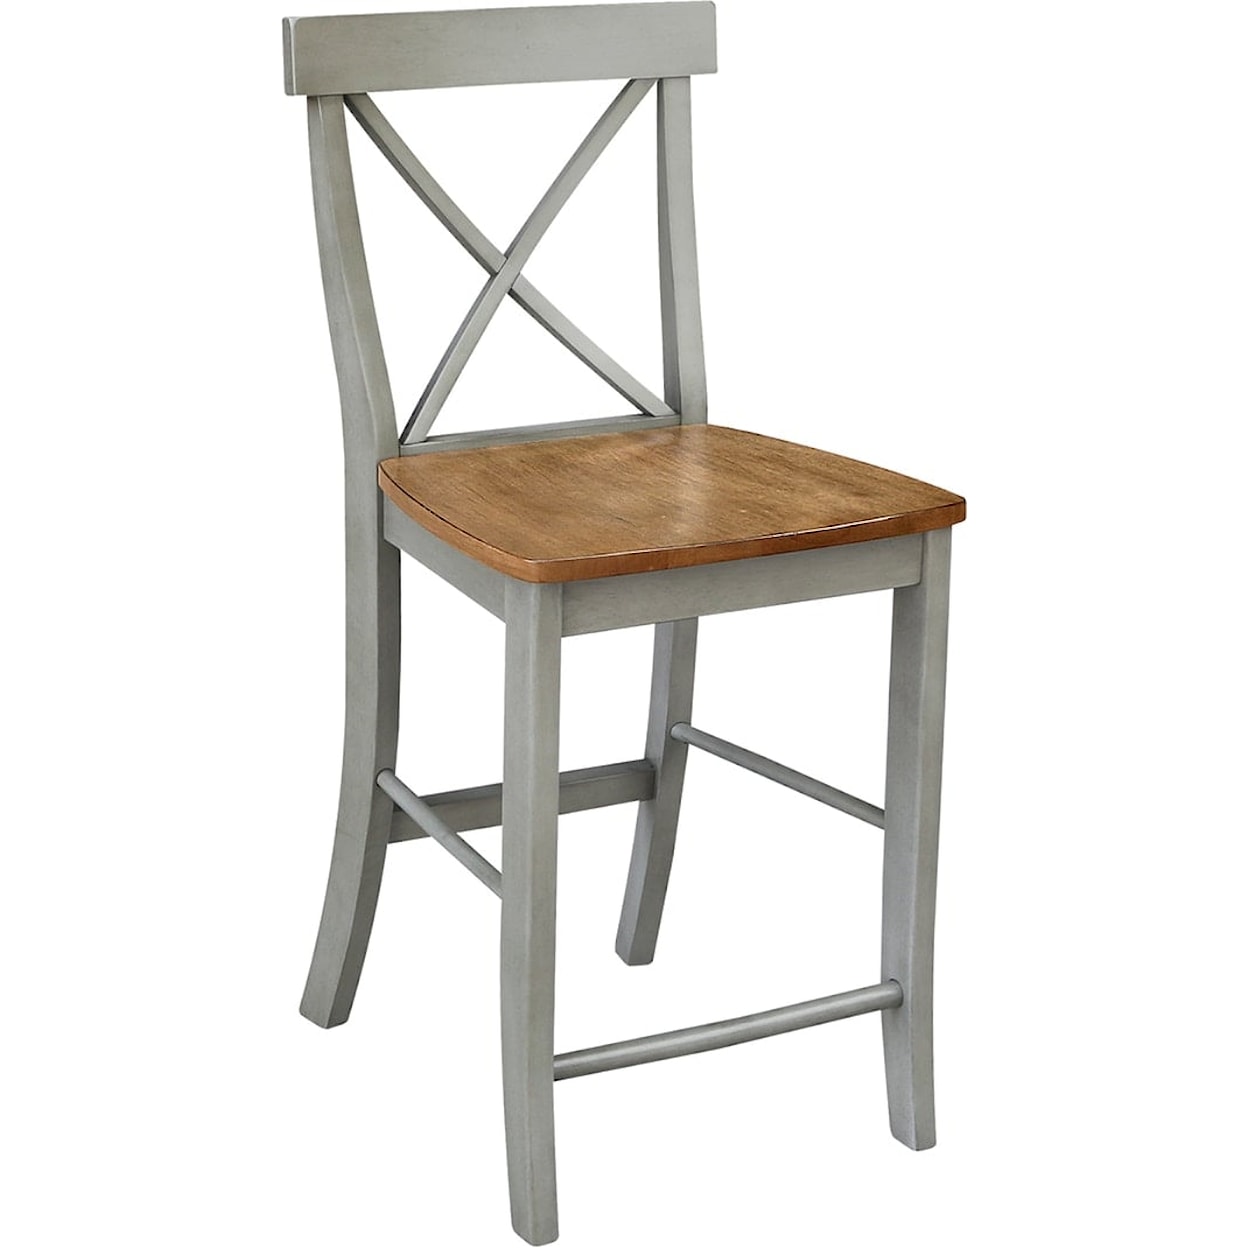 John Thomas Dining Essentials X-Back Stool in Hickory Stone